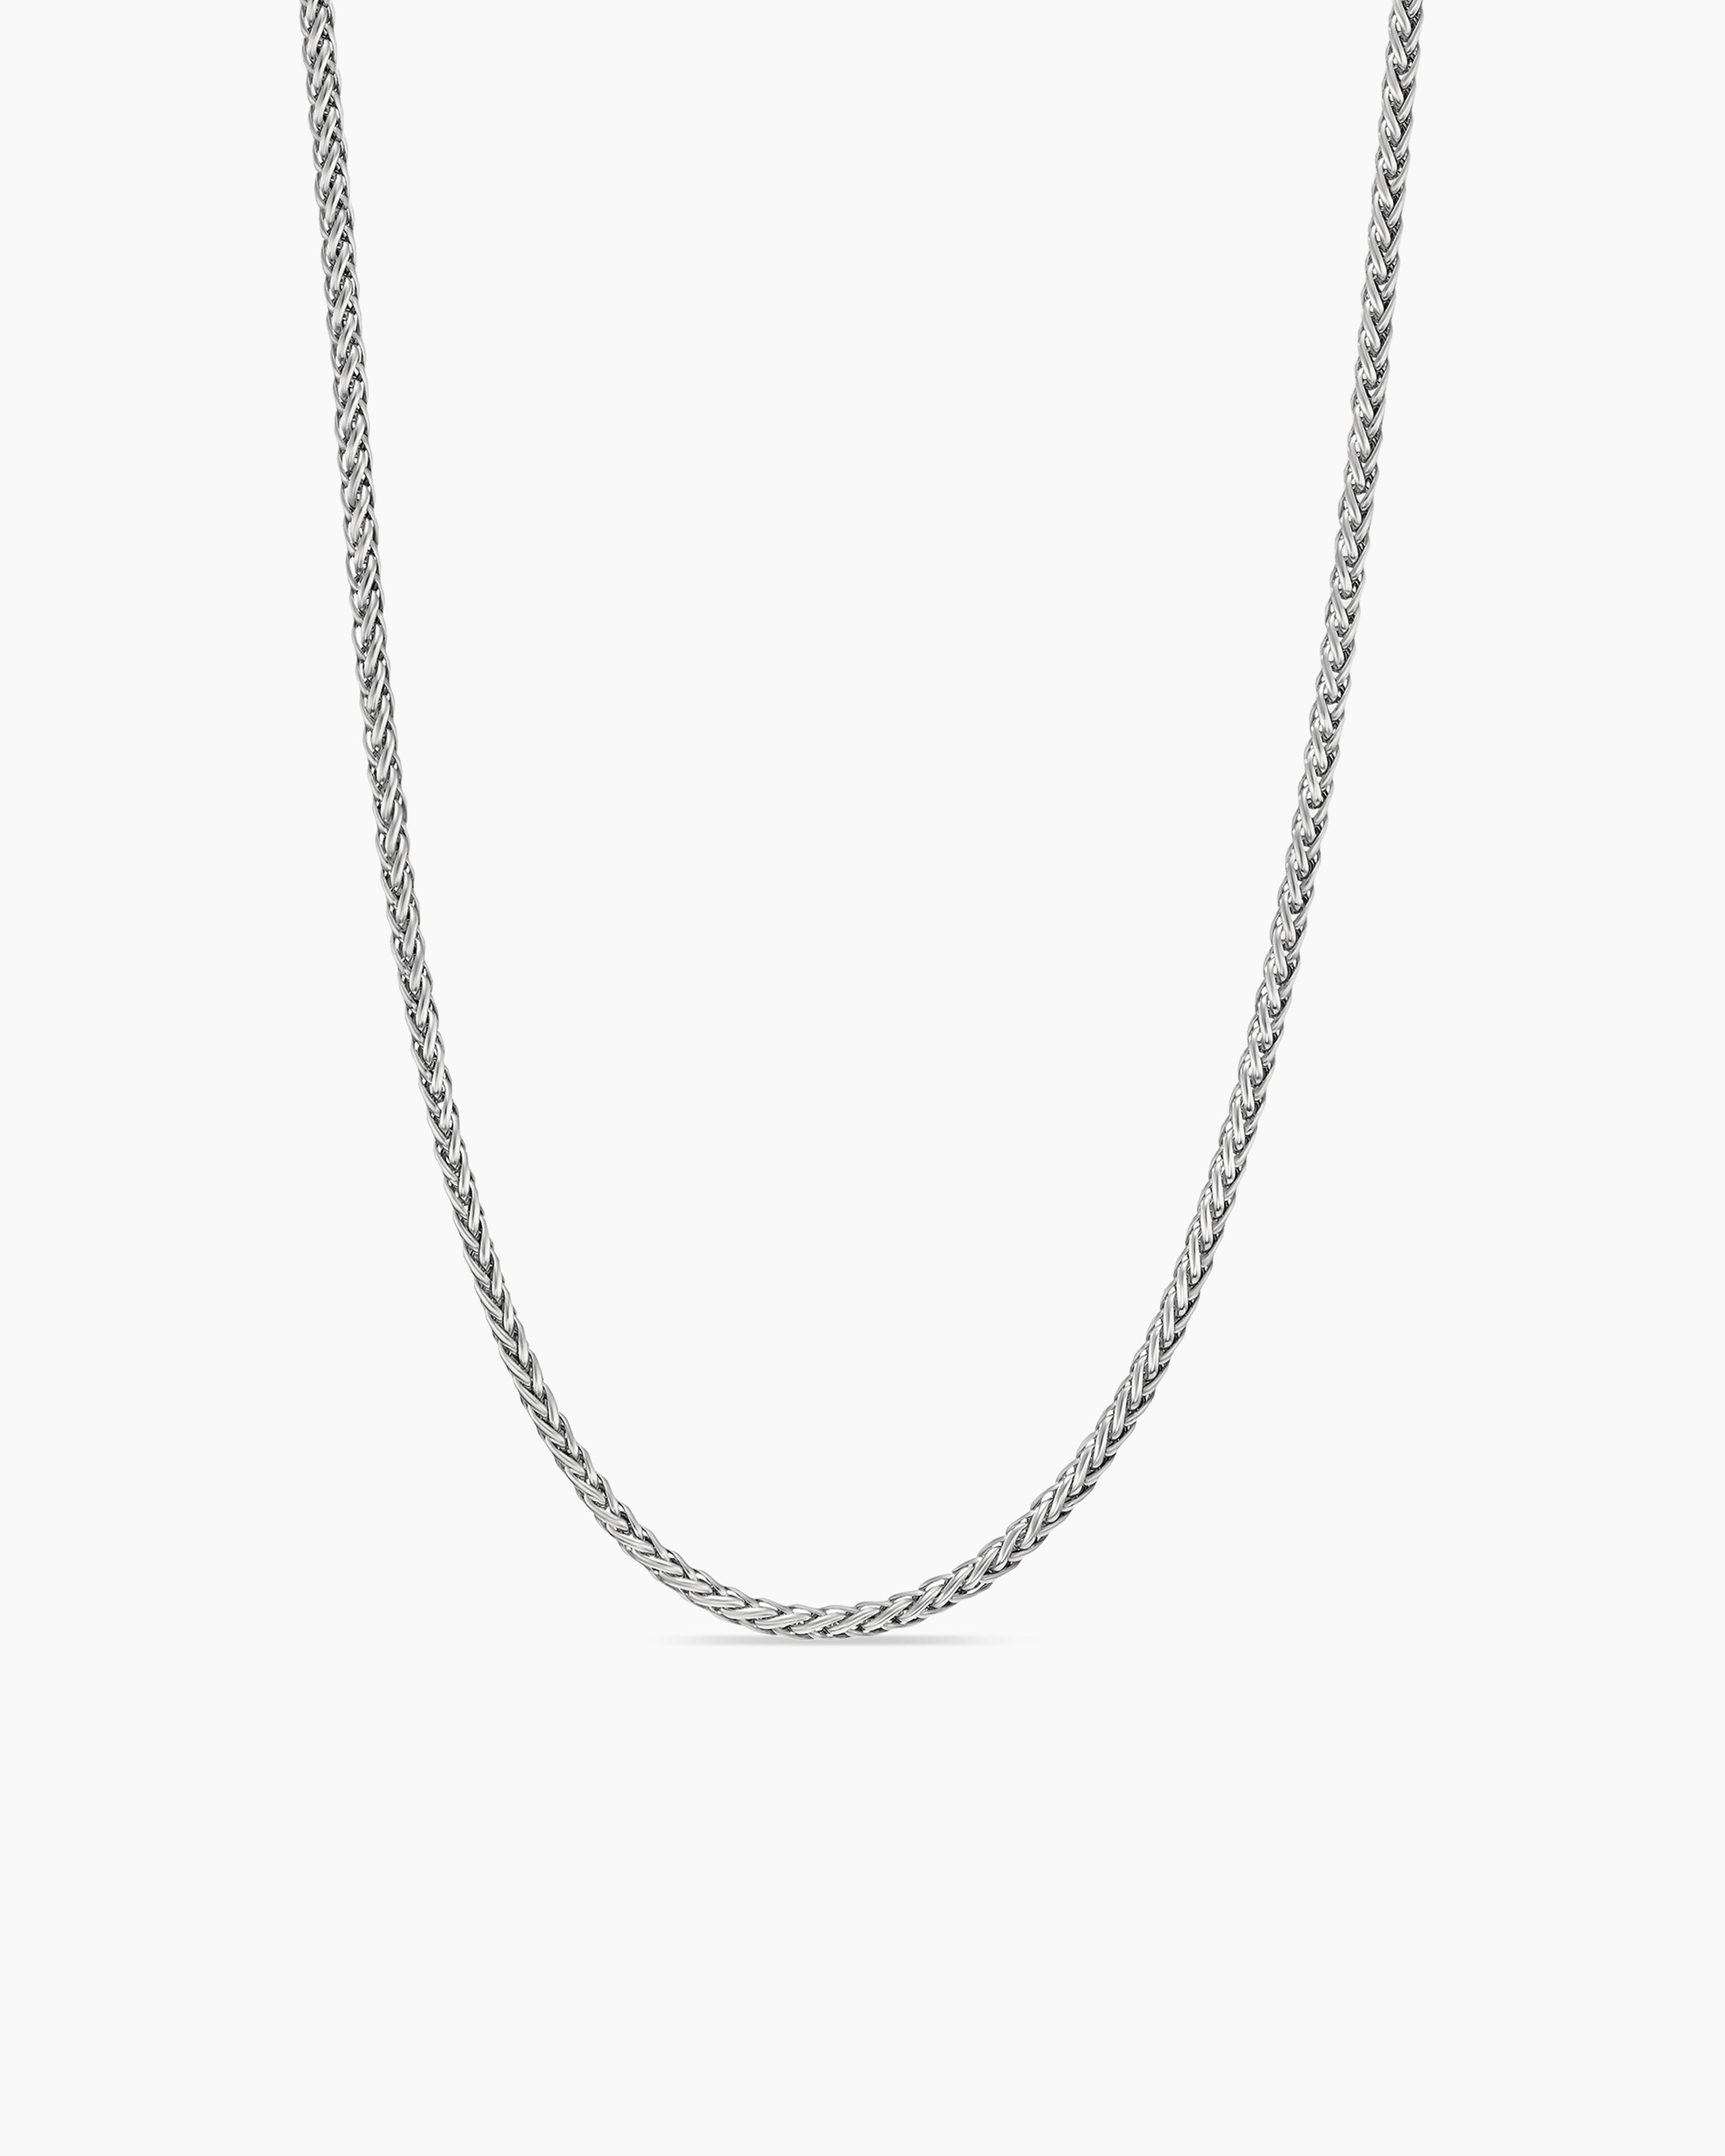 Savlano 2mm-5mm Stainless Steel Rope Twist Necklace Chain for Men & Women  Comes in 16-30 inches with a Gift Box (16, 2.5mm) | Amazon.com